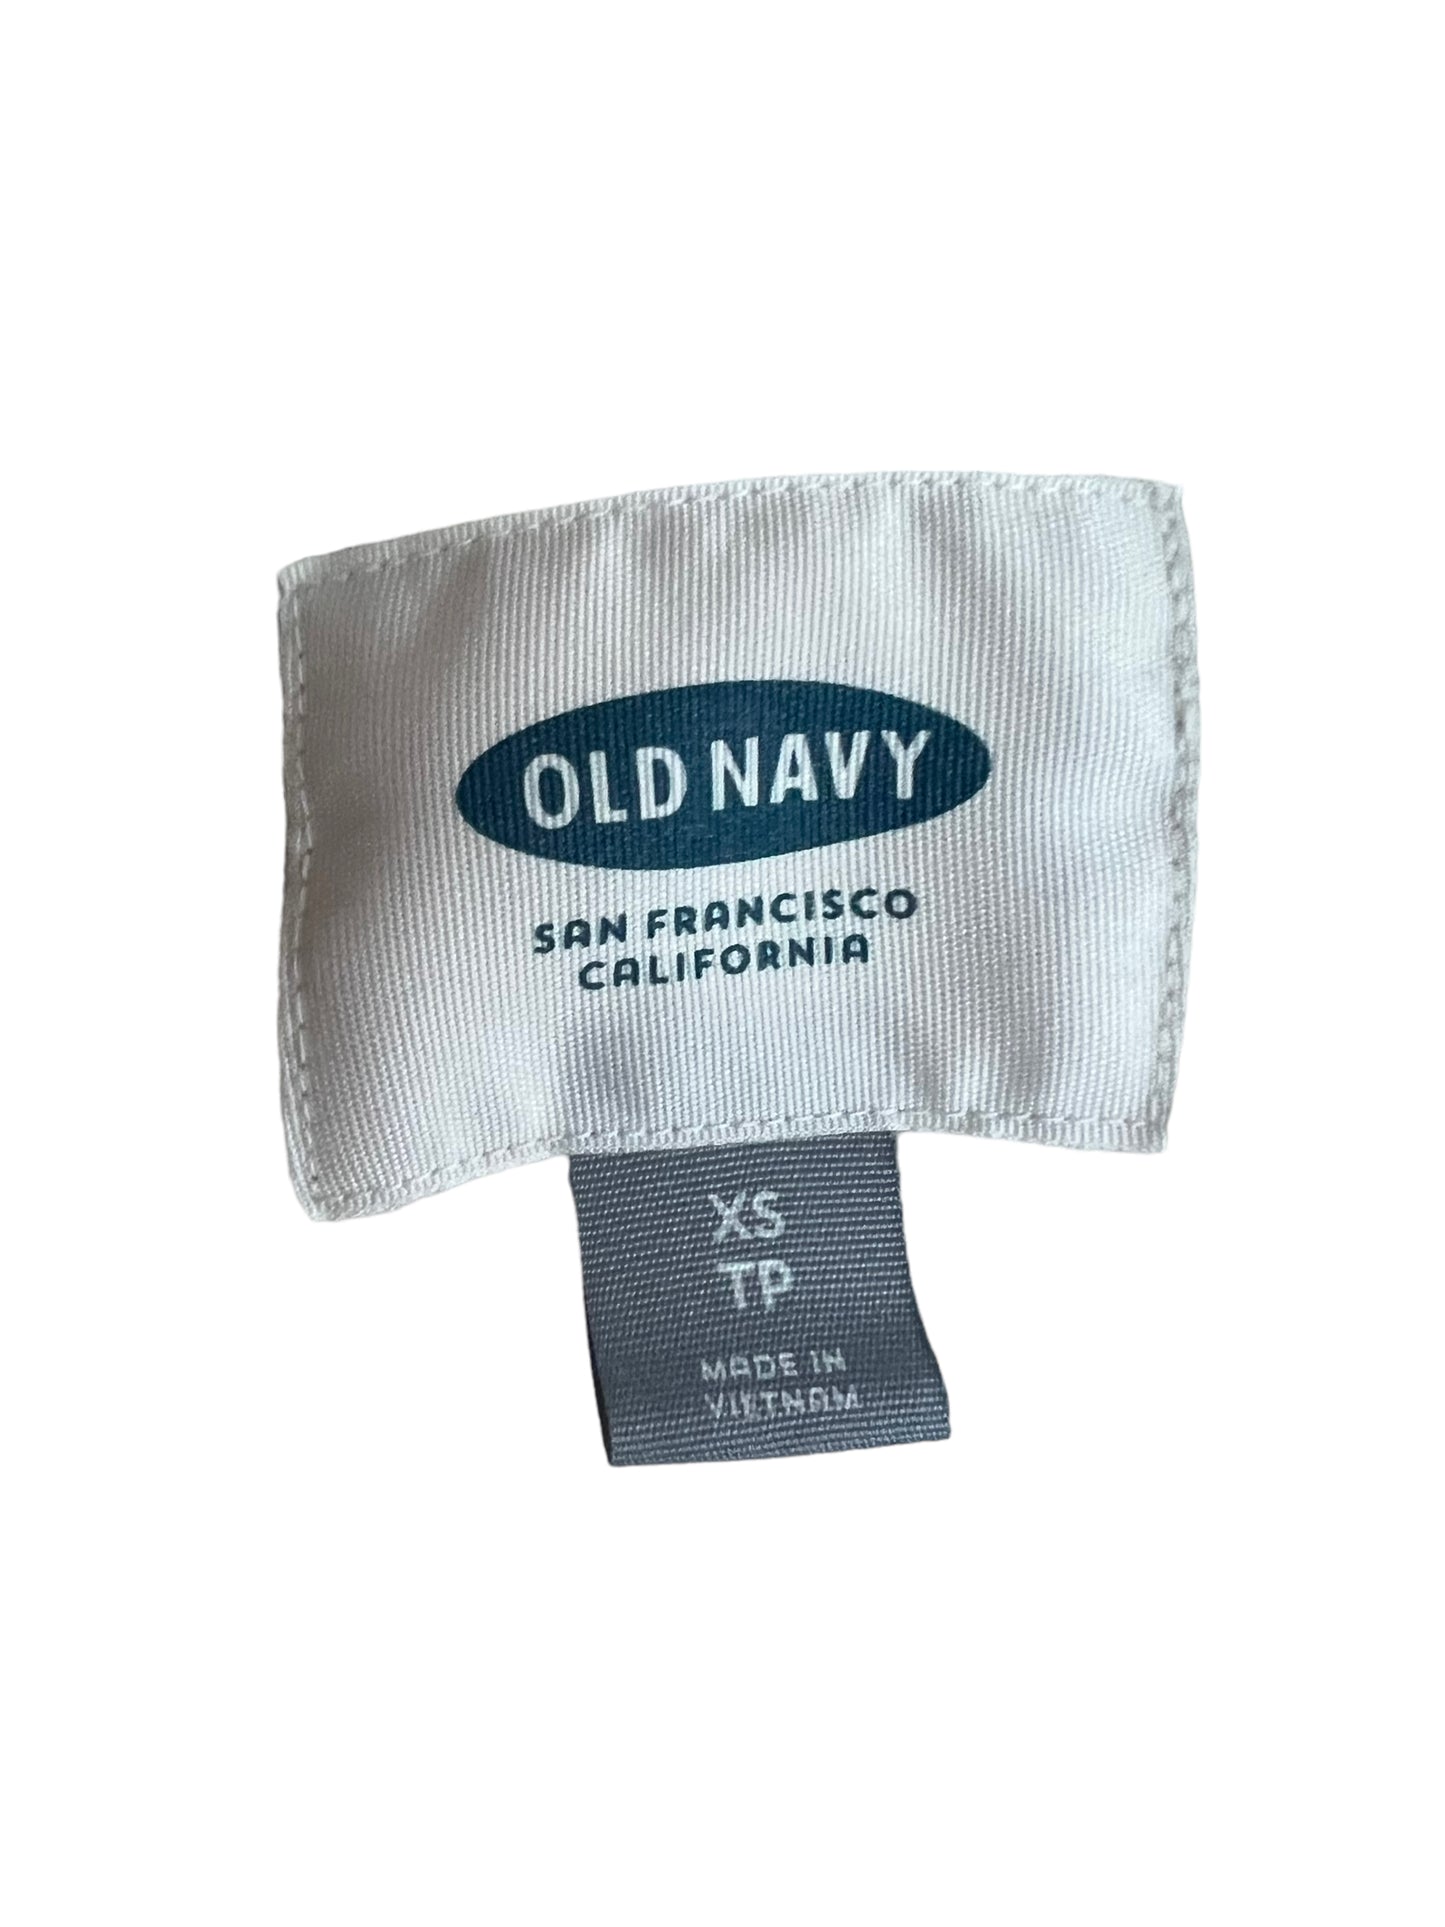 Old Navy Teddy Sweater